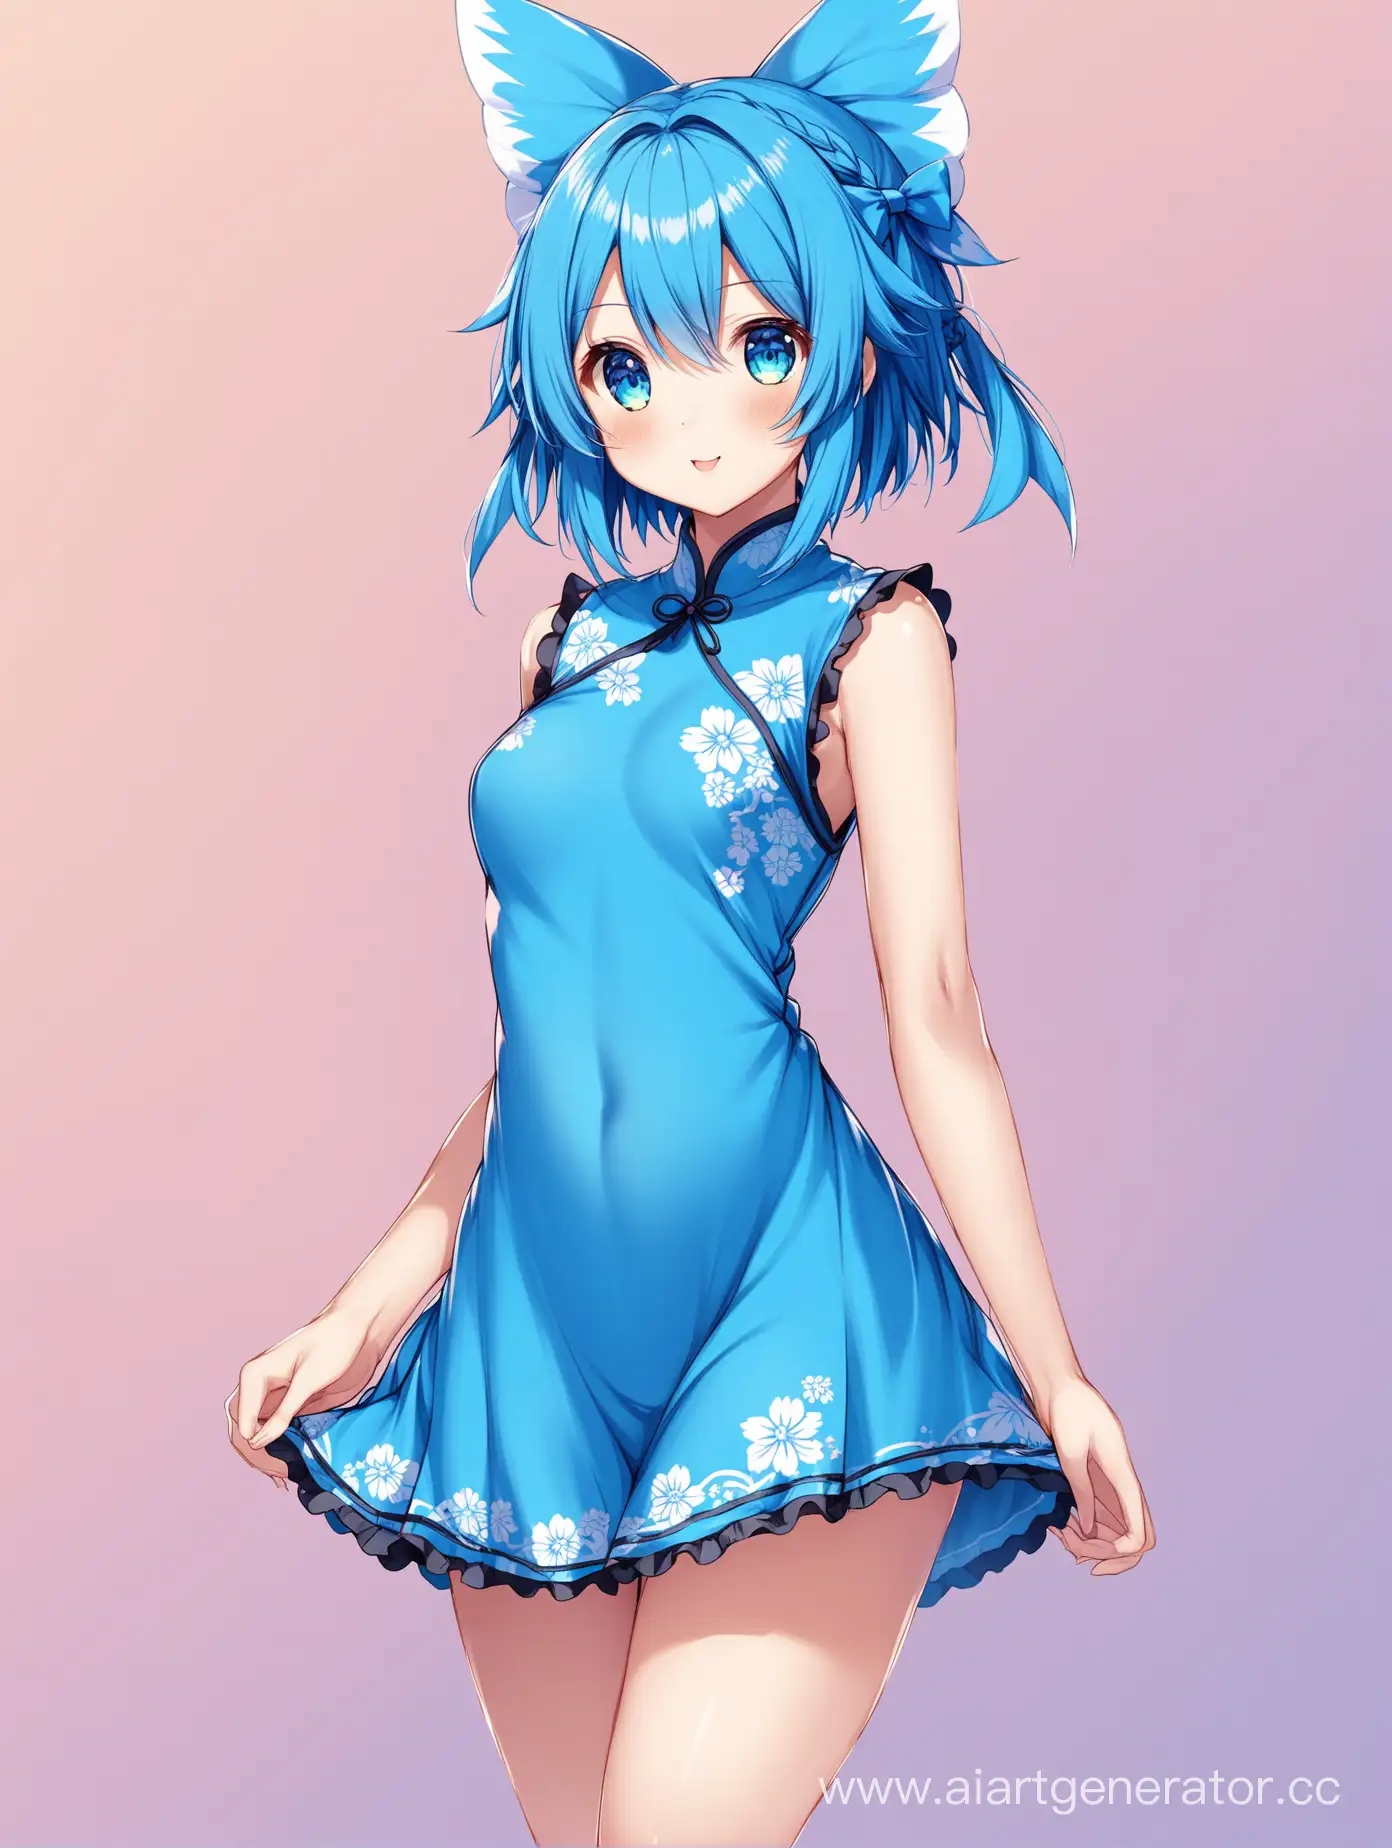 Cirno-in-Elegant-China-Dress-Exquisite-Anime-Character-Art